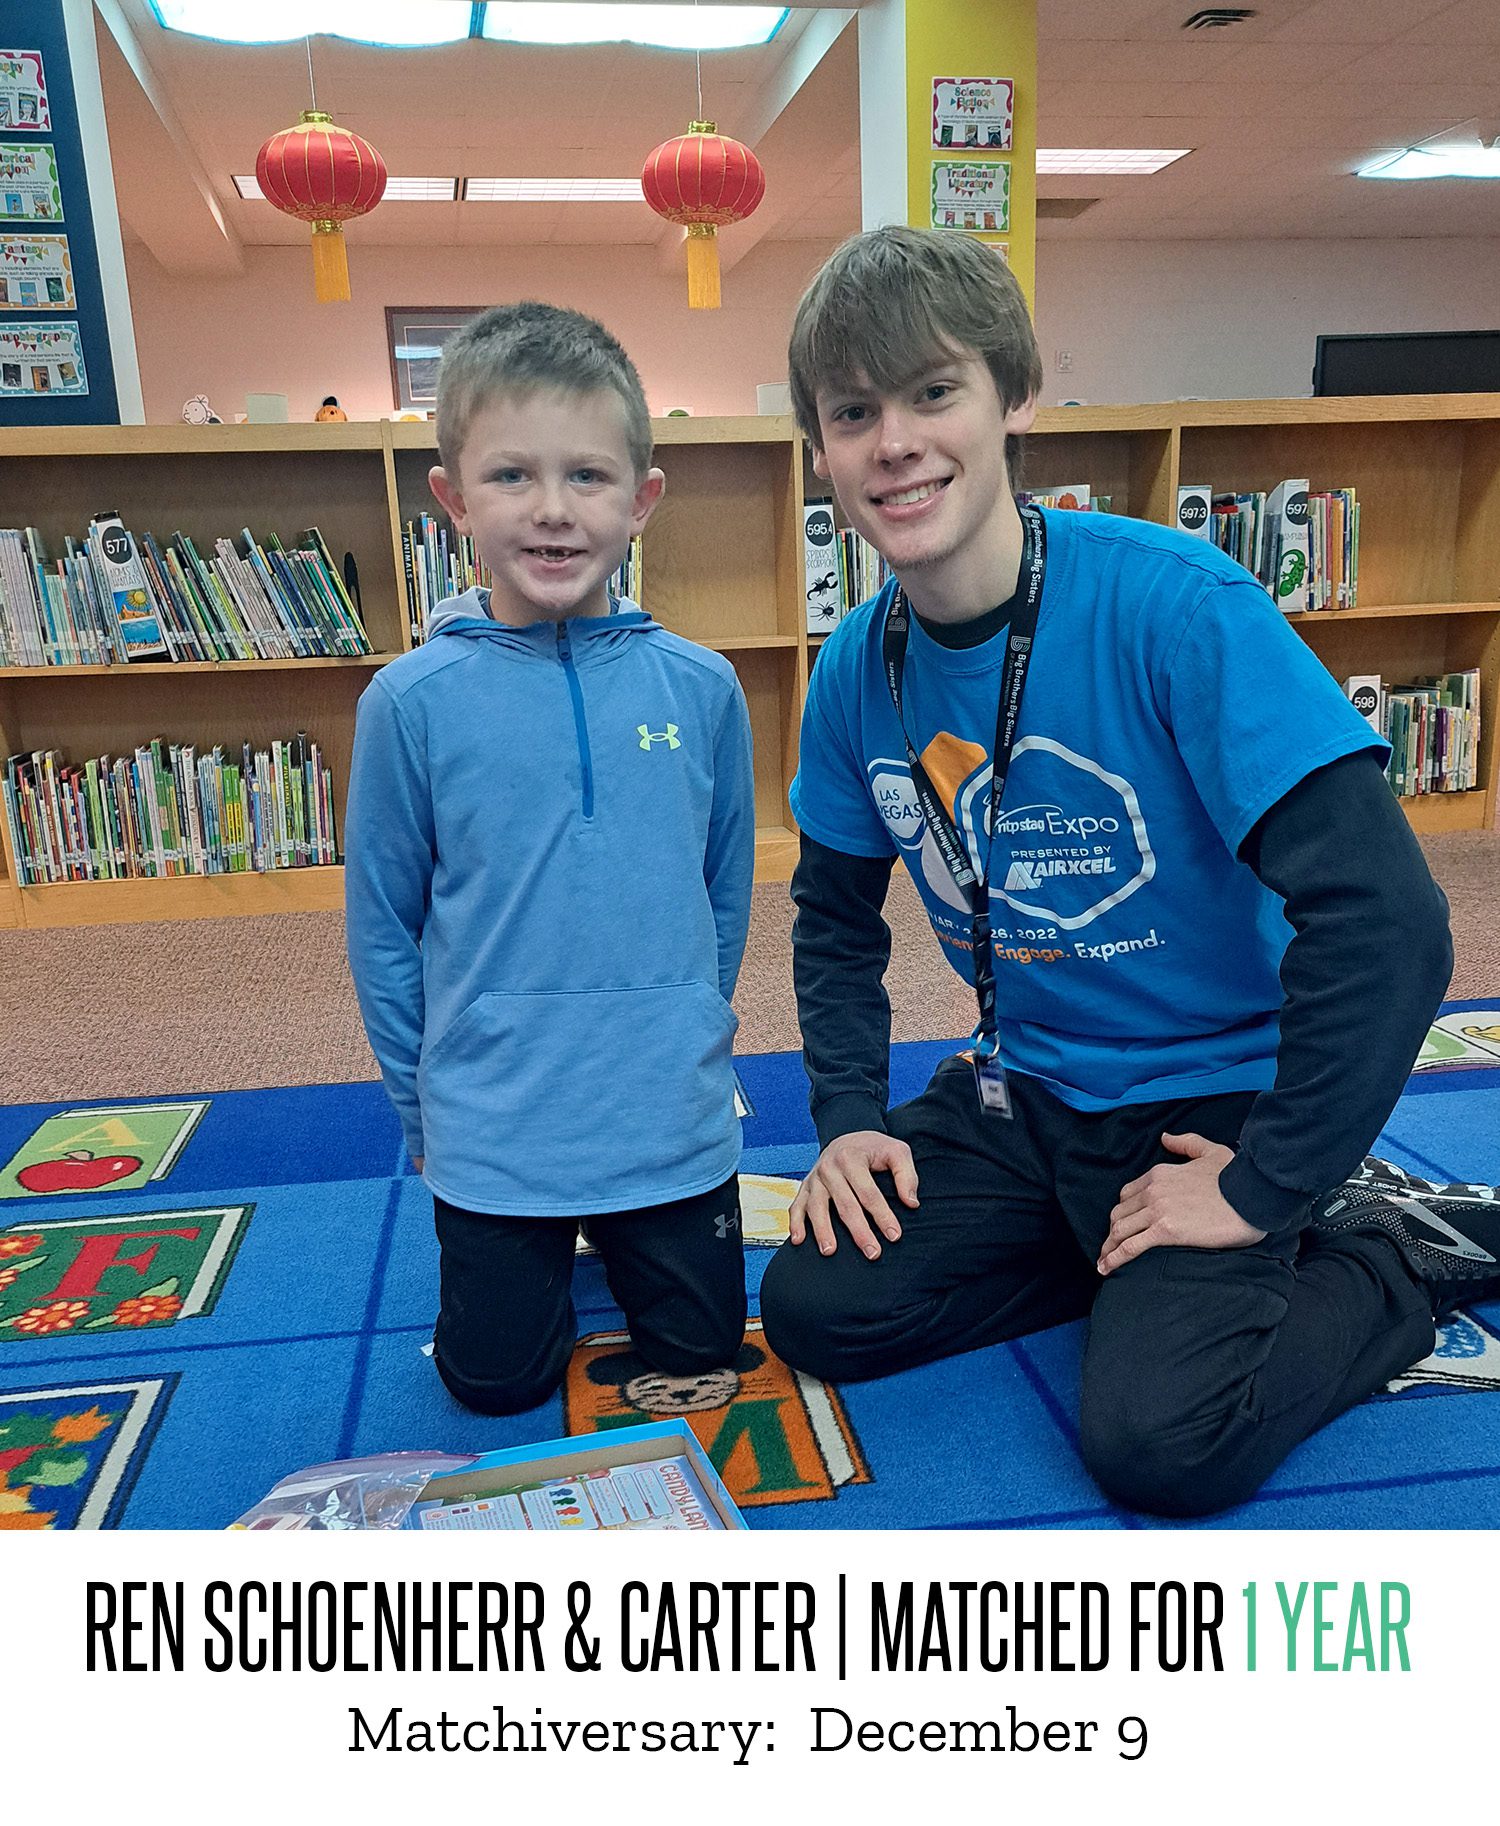 Ren Schoenherr and Carter pose for a picture after being matched for one year